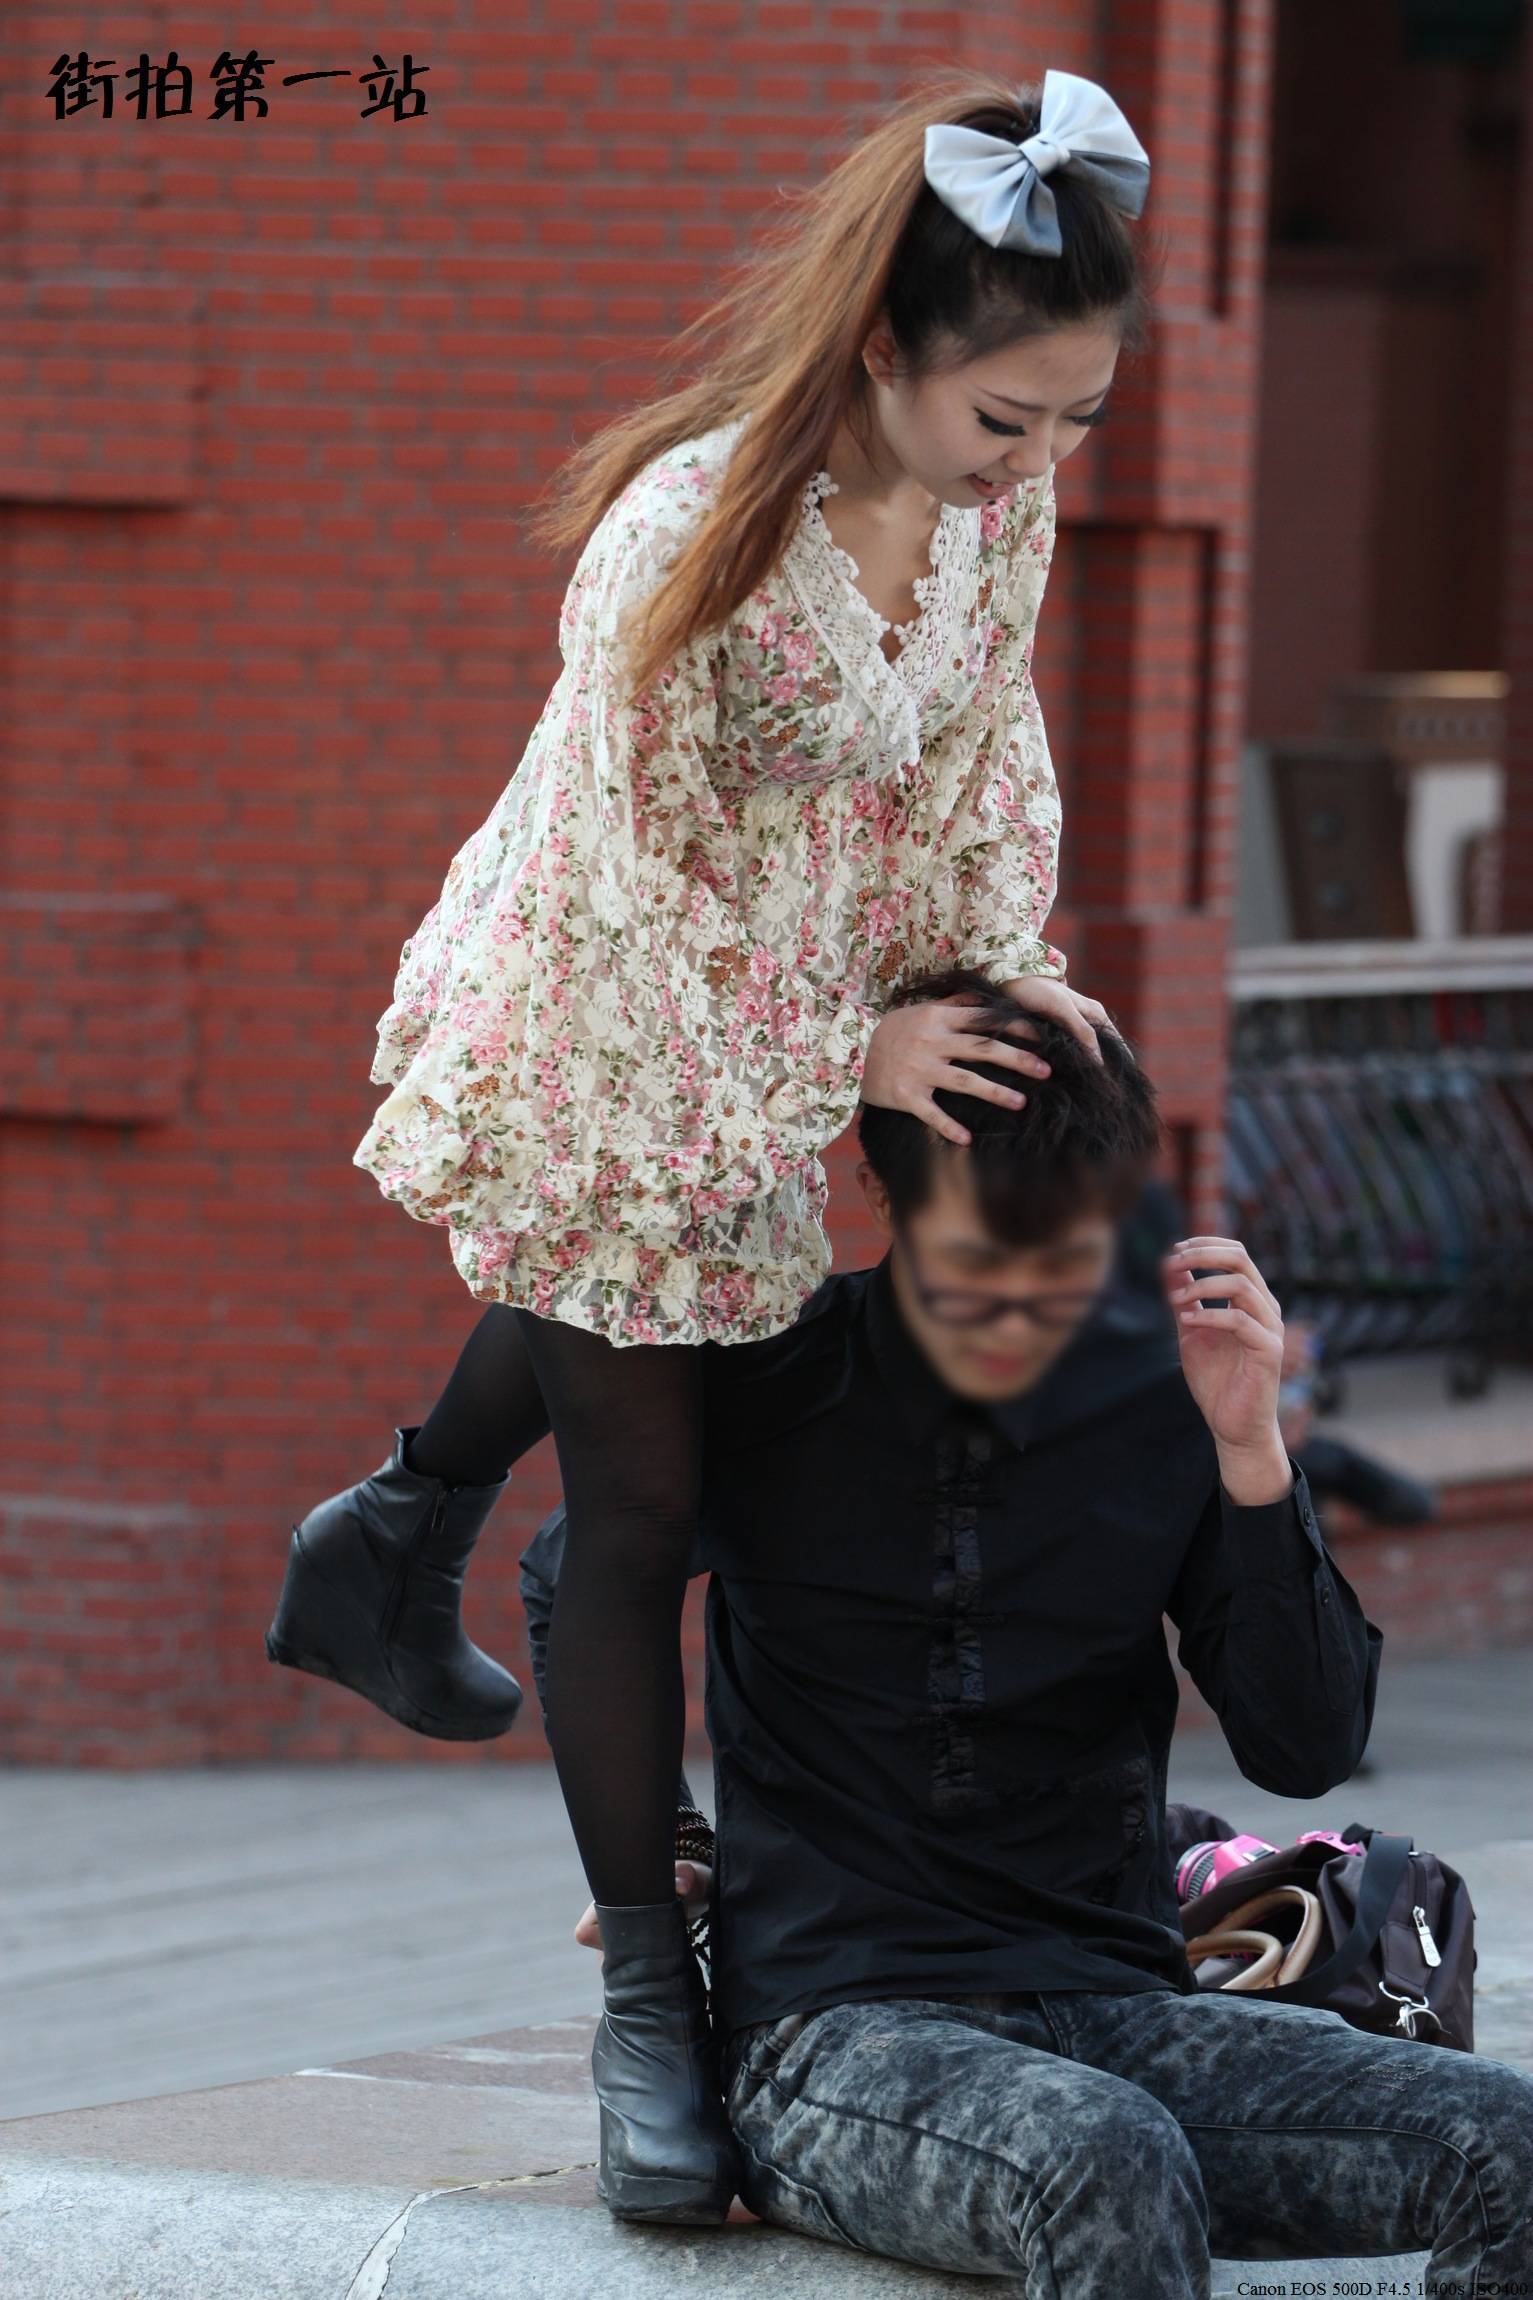 [online collection] sister Heisi riding on a man's shoulder on August 21, 2013